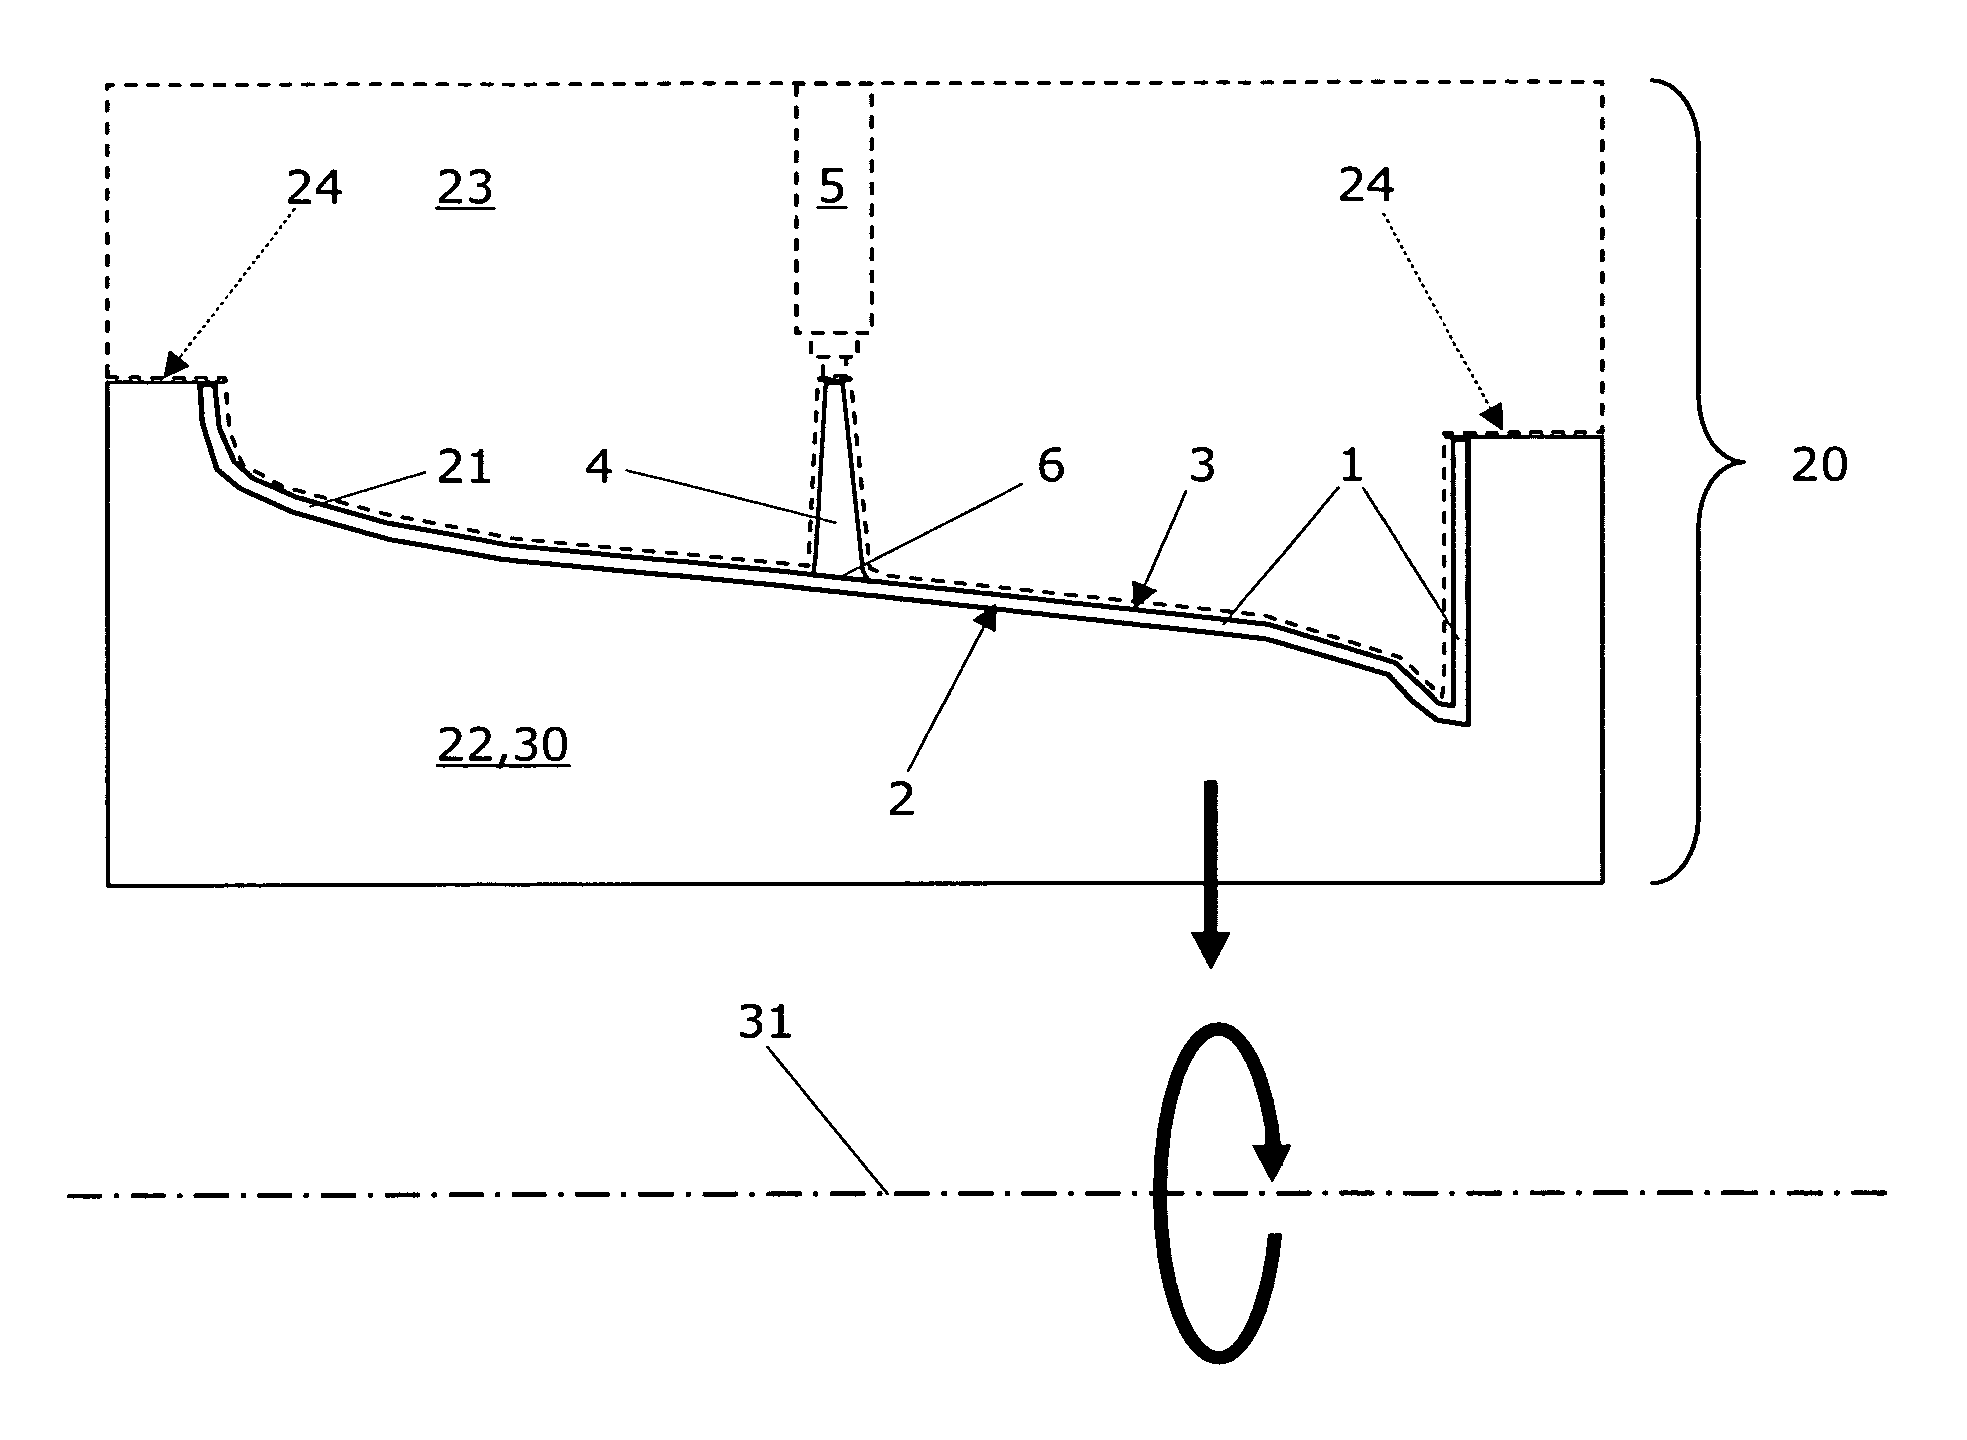 Injection molding method for manufacturing plastic parts